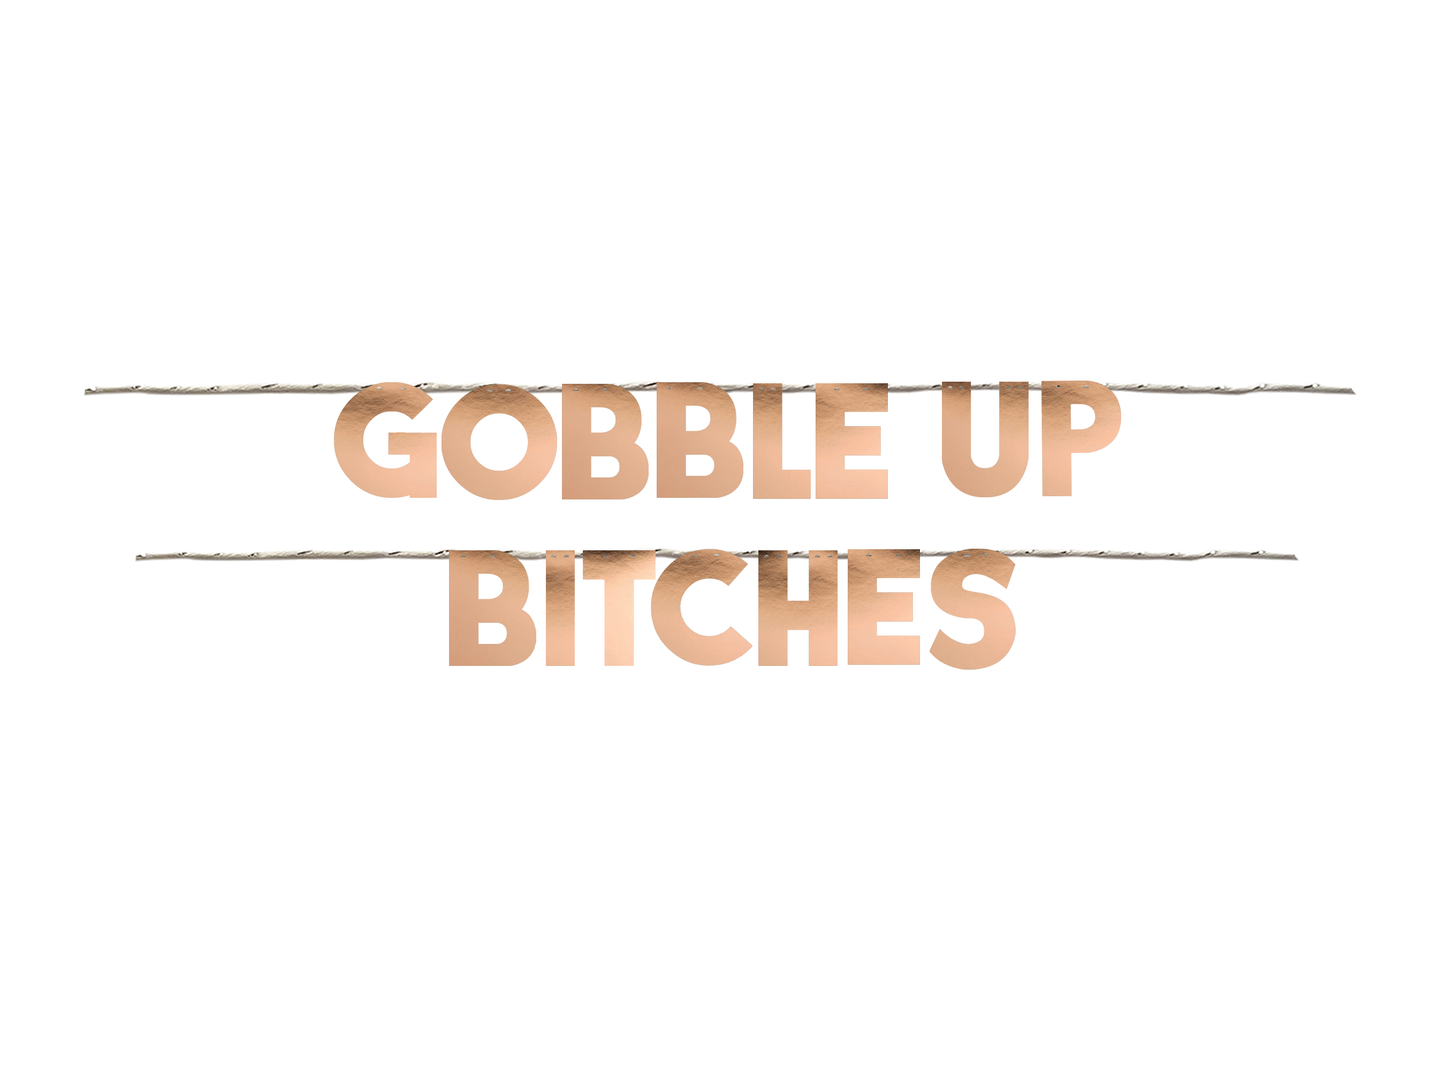 GOBBLE UP BITCHES